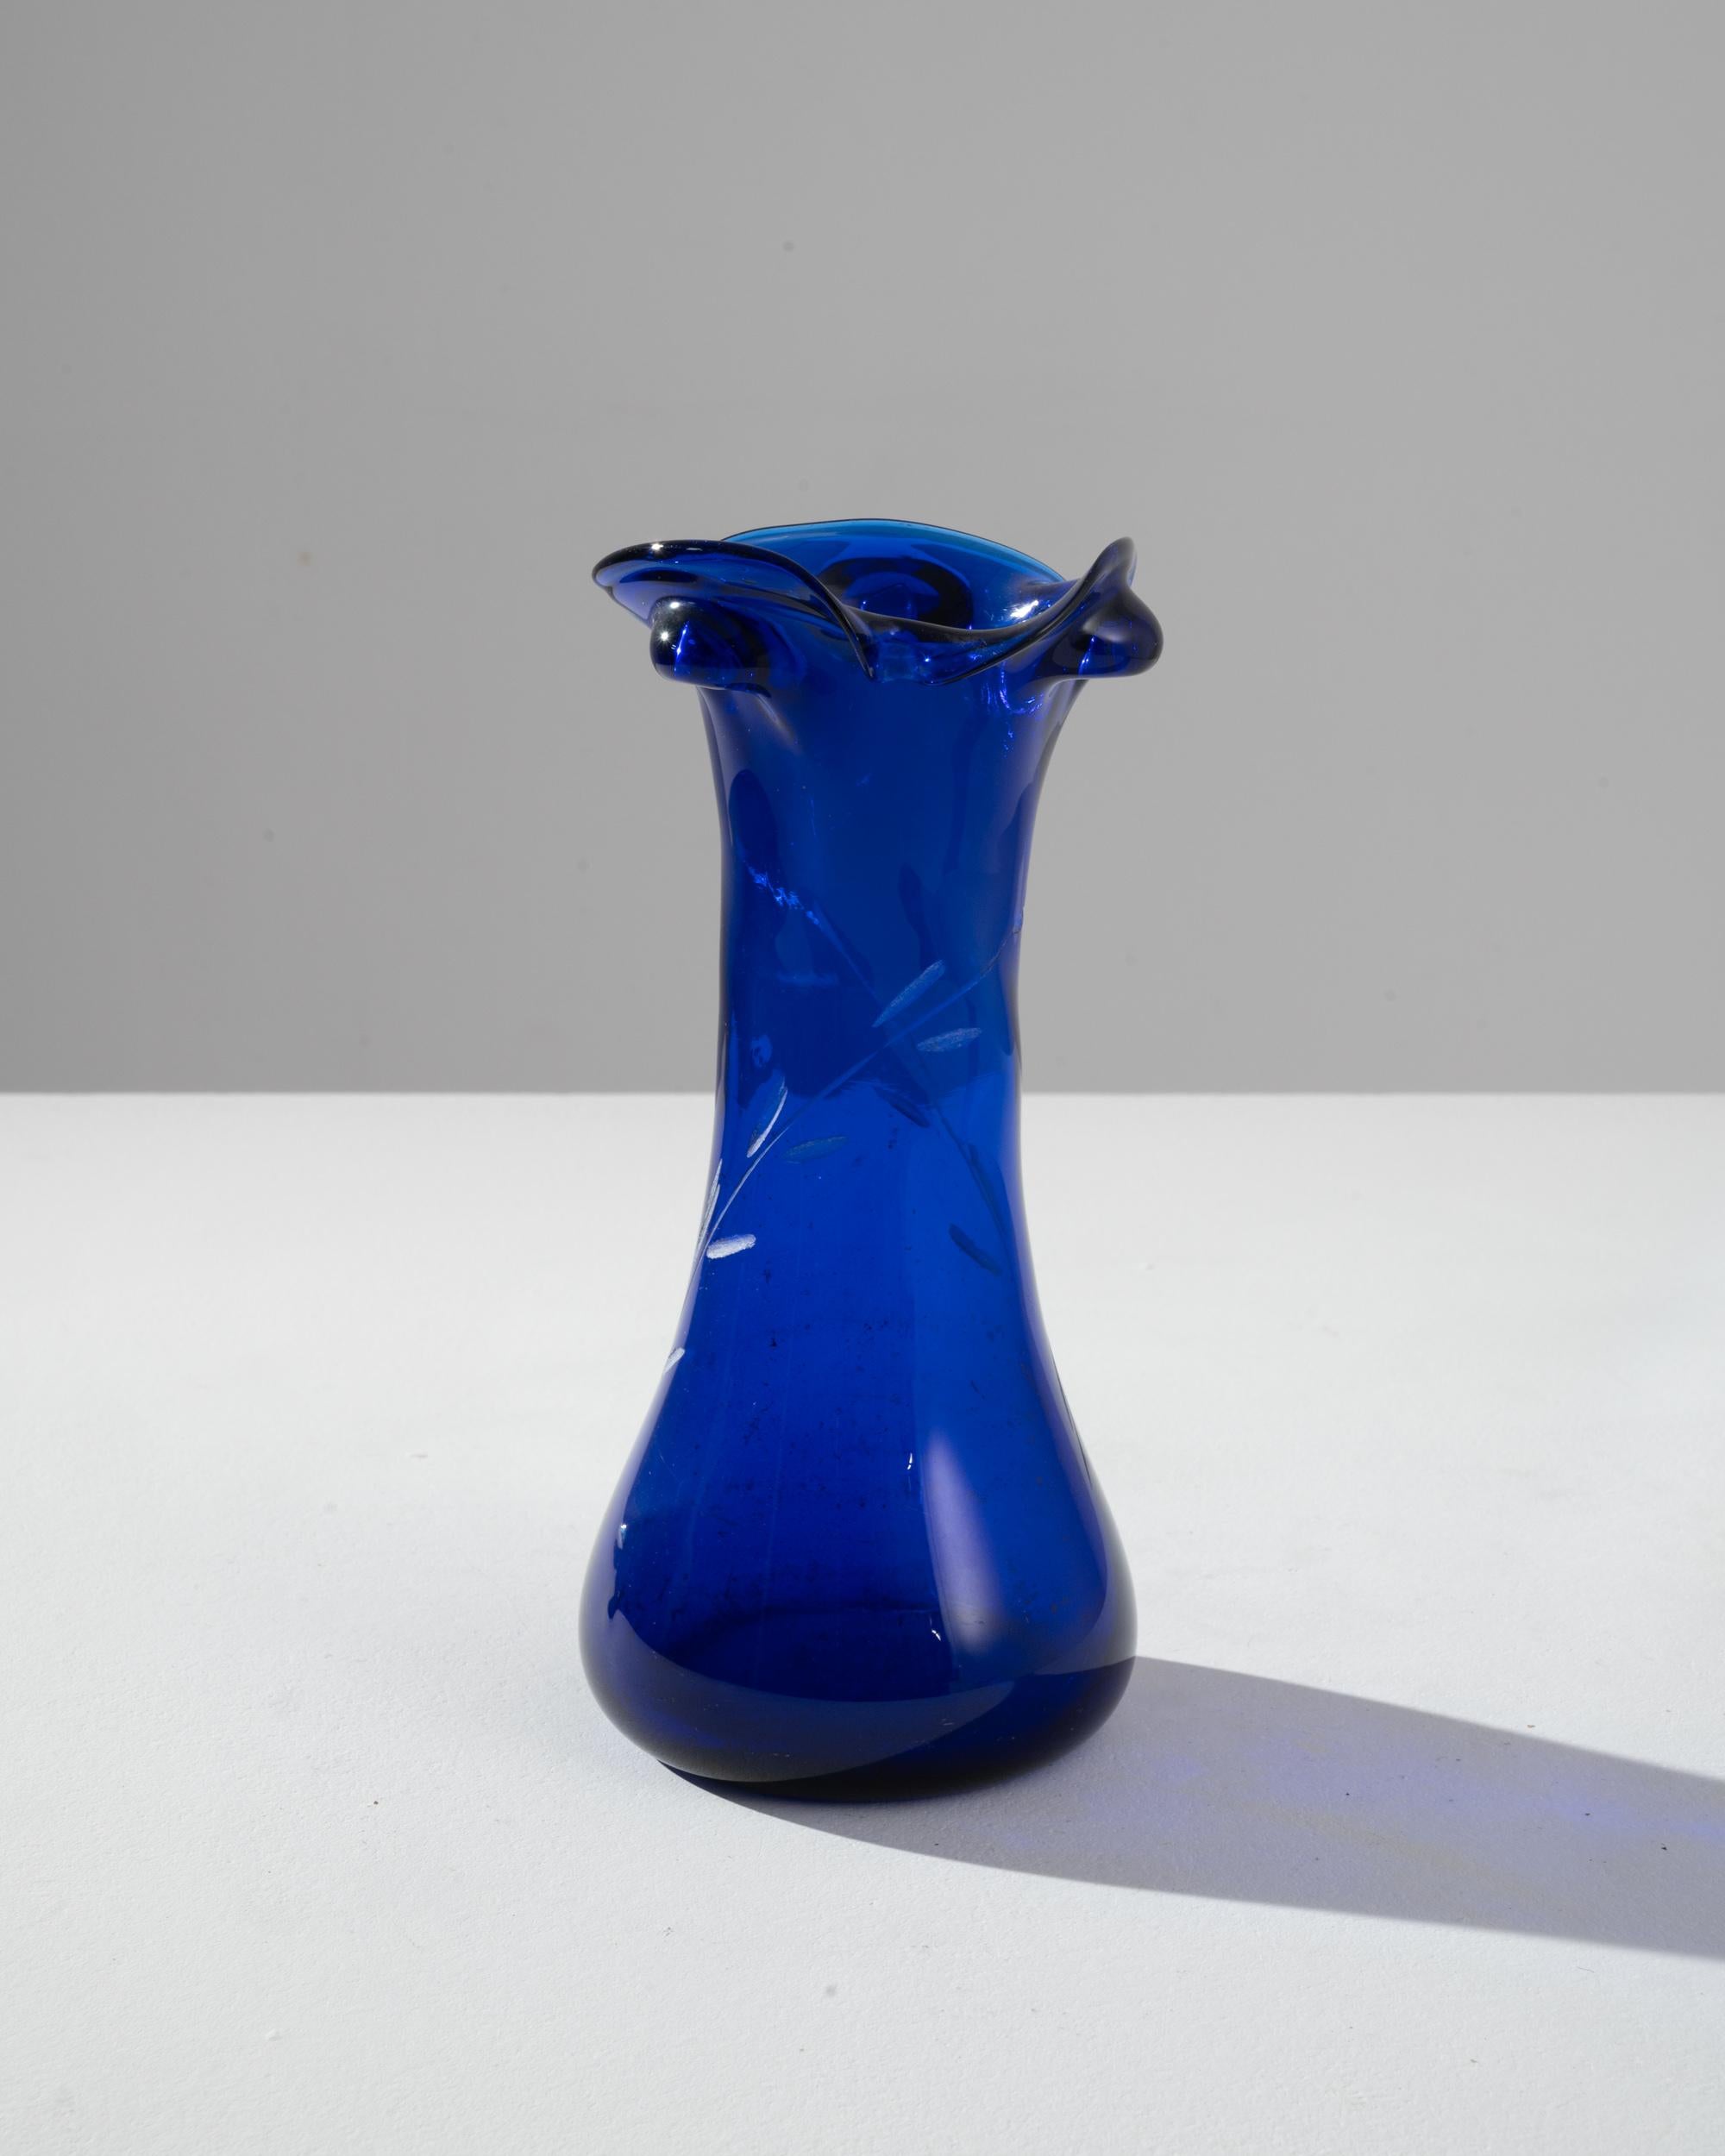 The captivating allure of this 1960s Italian blue glass vase lies in its vibrant cobalt hue and whimsical form. Crafted with a flair for drama, the vase's fluted top ripples elegantly, resembling the petals of an exotic flower. Speckled with subtle